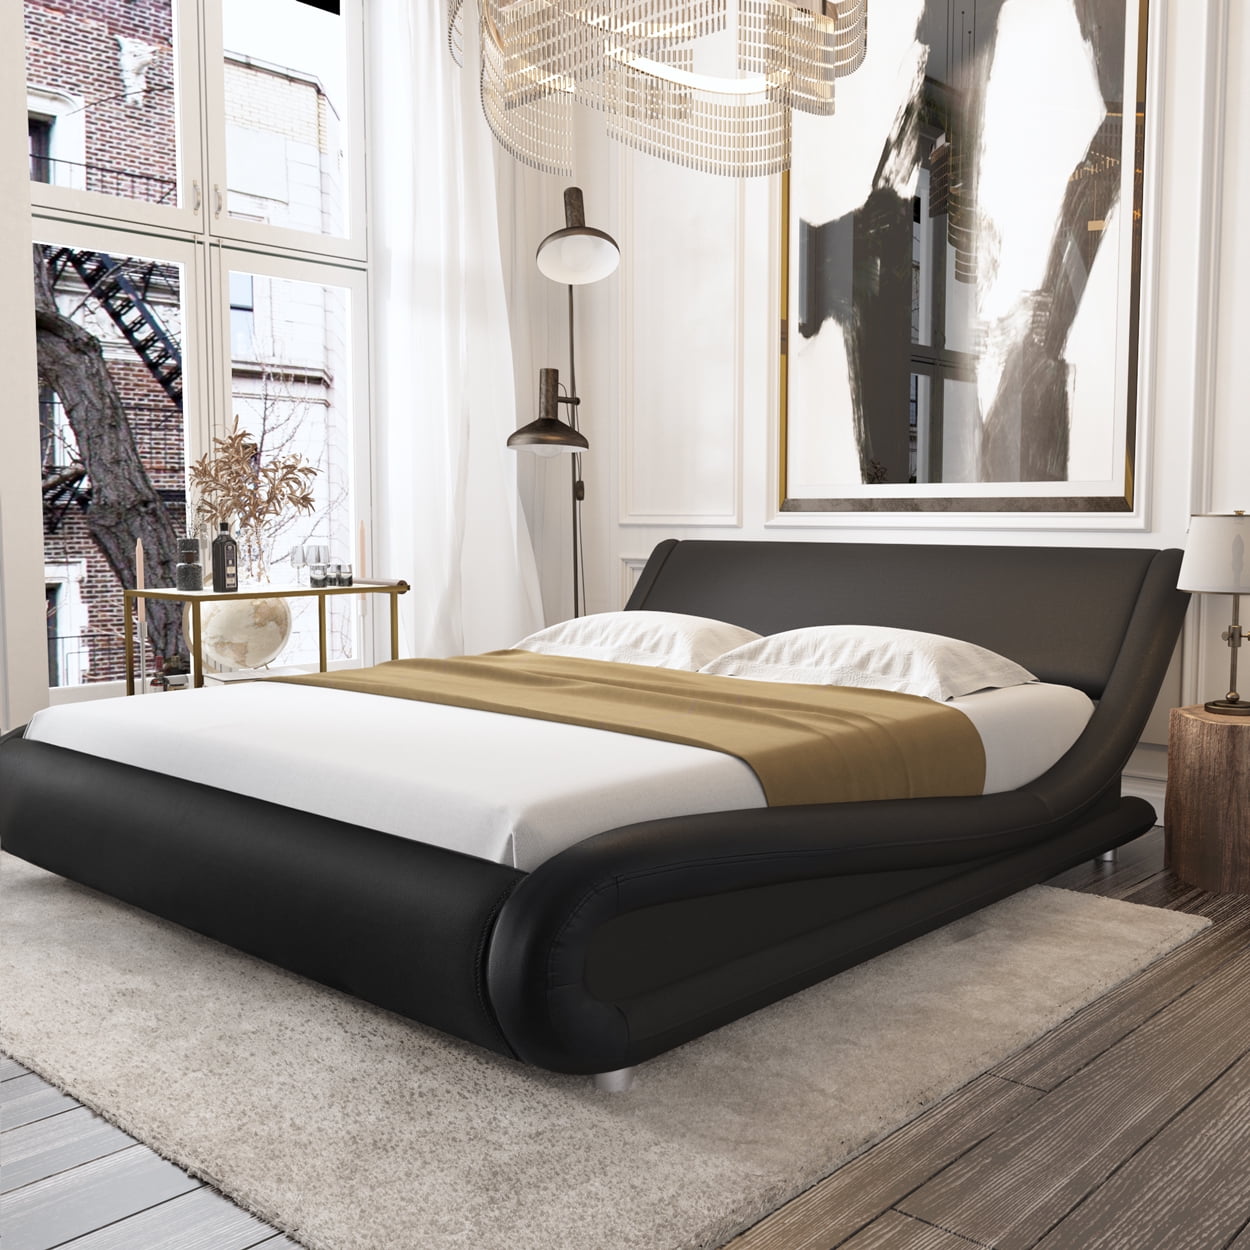 Amolife King Size Bed Frame With Curved, Black Leather Headboard King